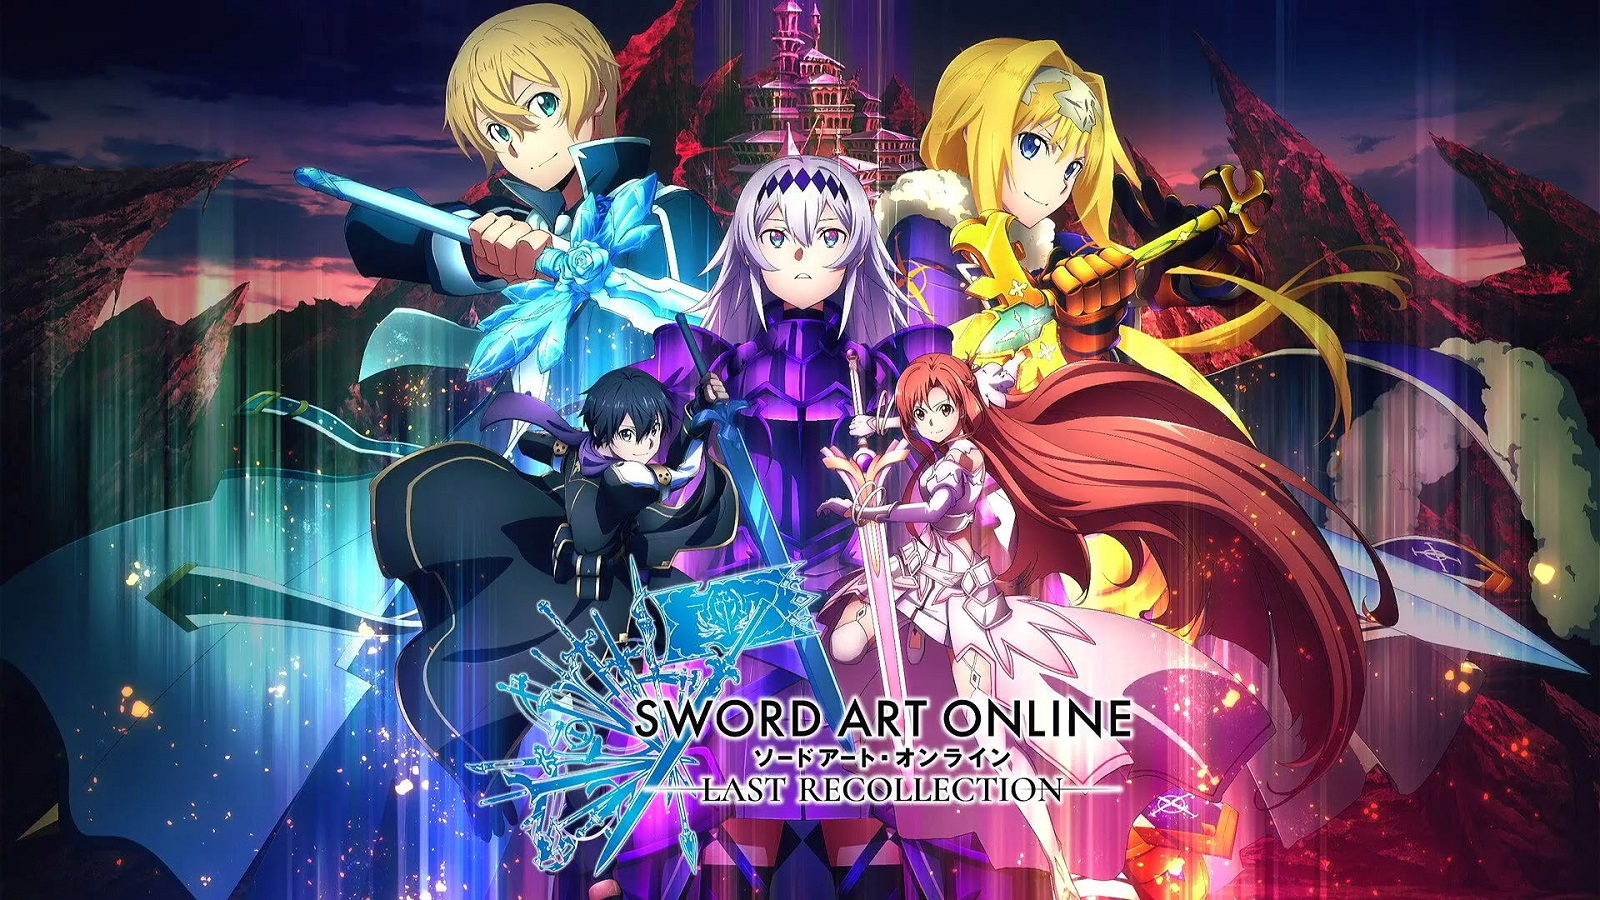 download last recollection sao